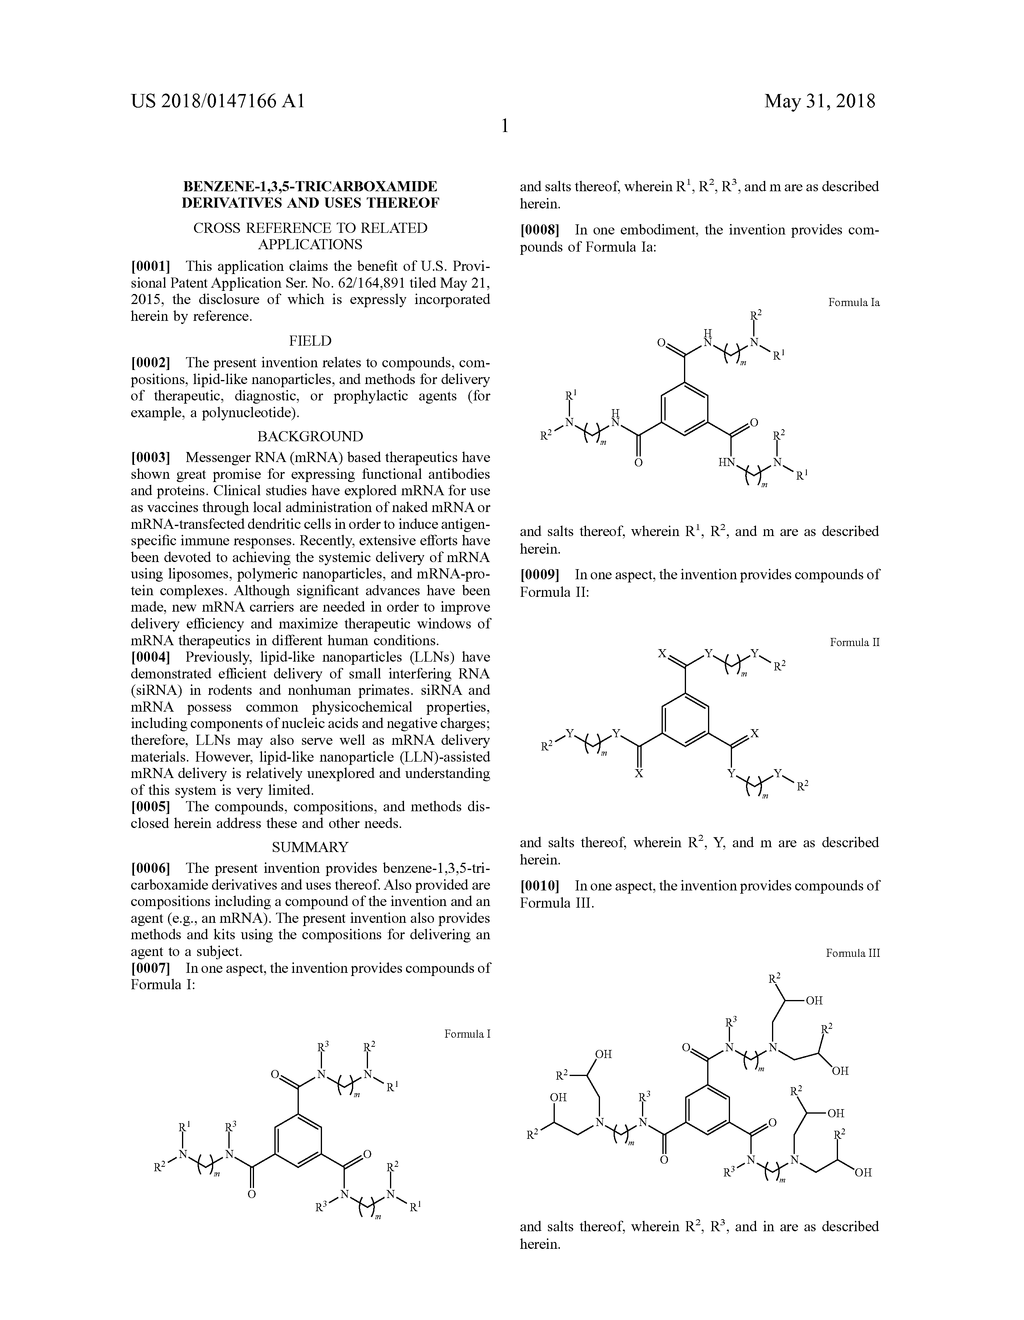 BENZENE-1,3,5-TRICARBOXAMIDE DERIVATIVES AND USES THEREOF - diagram, schematic, and image 14